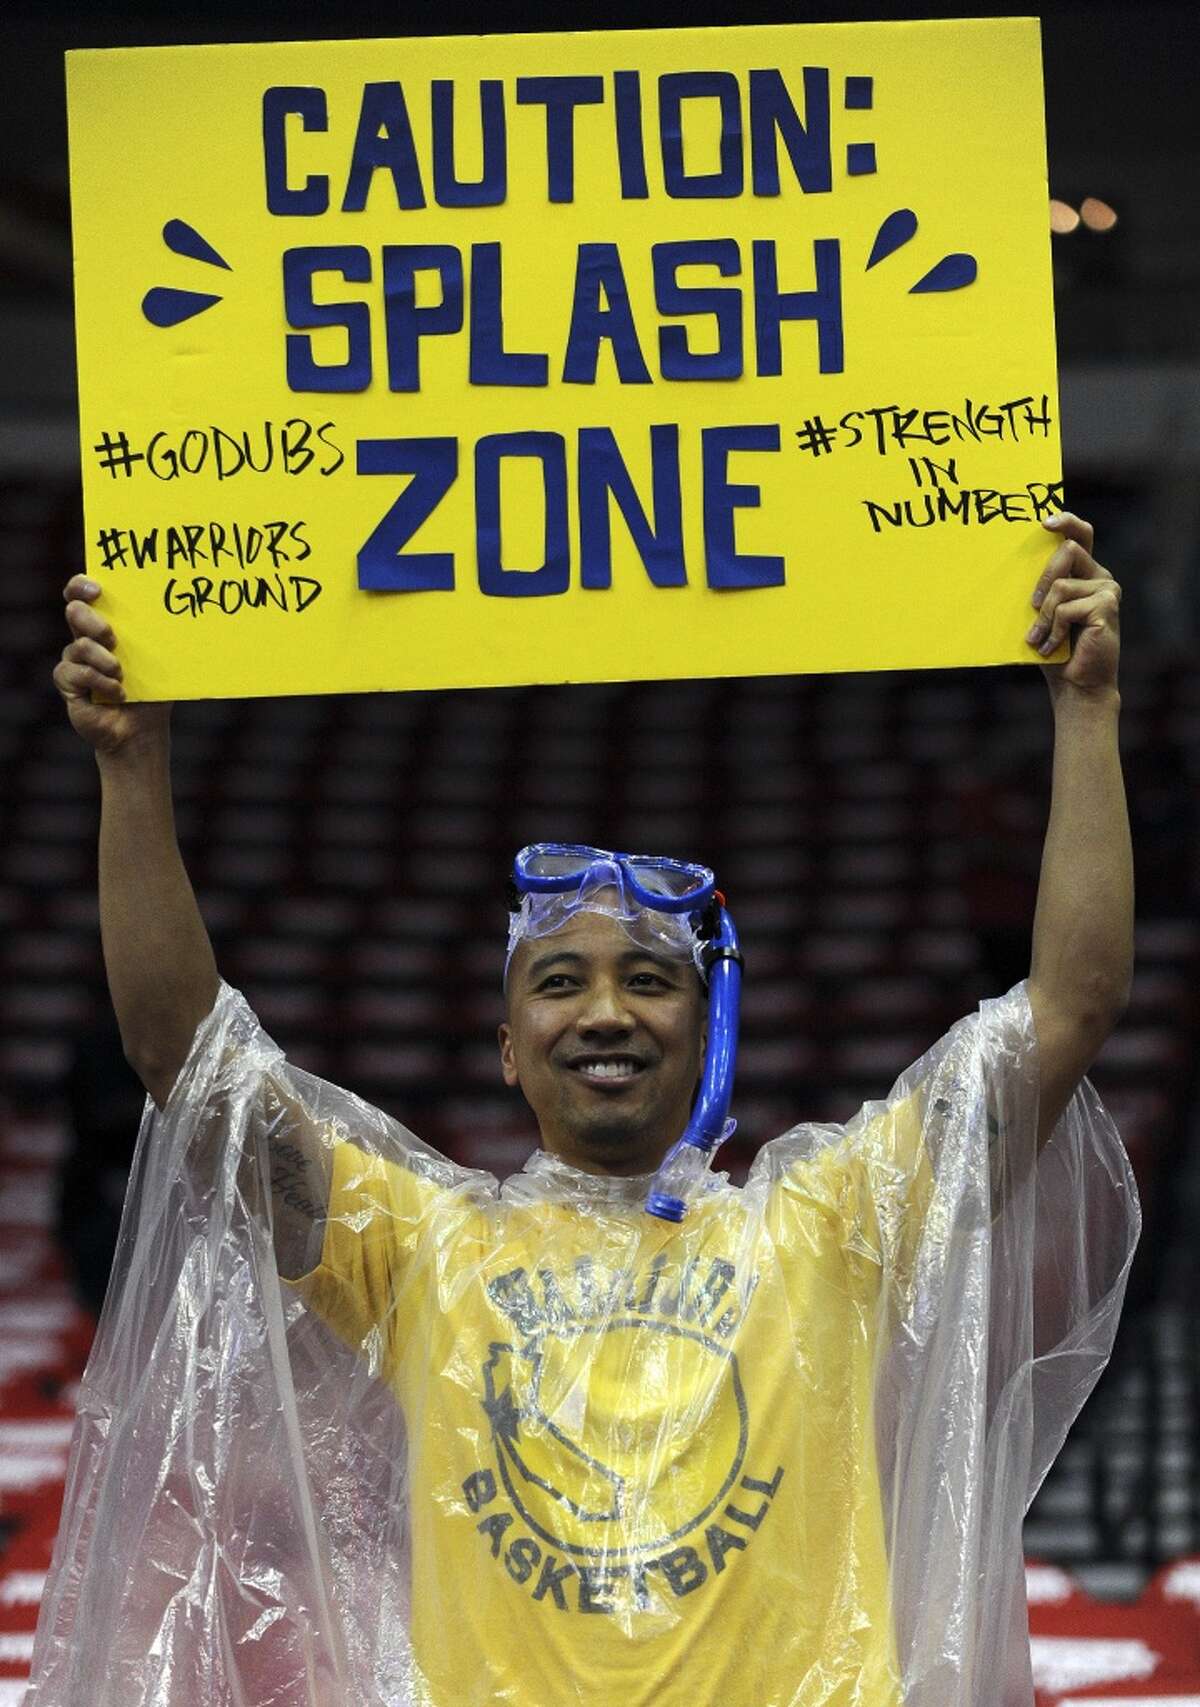 Golden State Warriors fan Angelo Macugay of San Francisco, CA. displays a sign supporting Golden State Warriors guard Stephen Curry #30 and Golden State Warriors guard Klay Thompson #11before Game 3 of the Western Conference Finals against the Houston Rockets, Saturday, May 23, 2015, at Toyota Center in Houston, TX. (Photo: Eric Christian Smith/Special to the Chronicle)